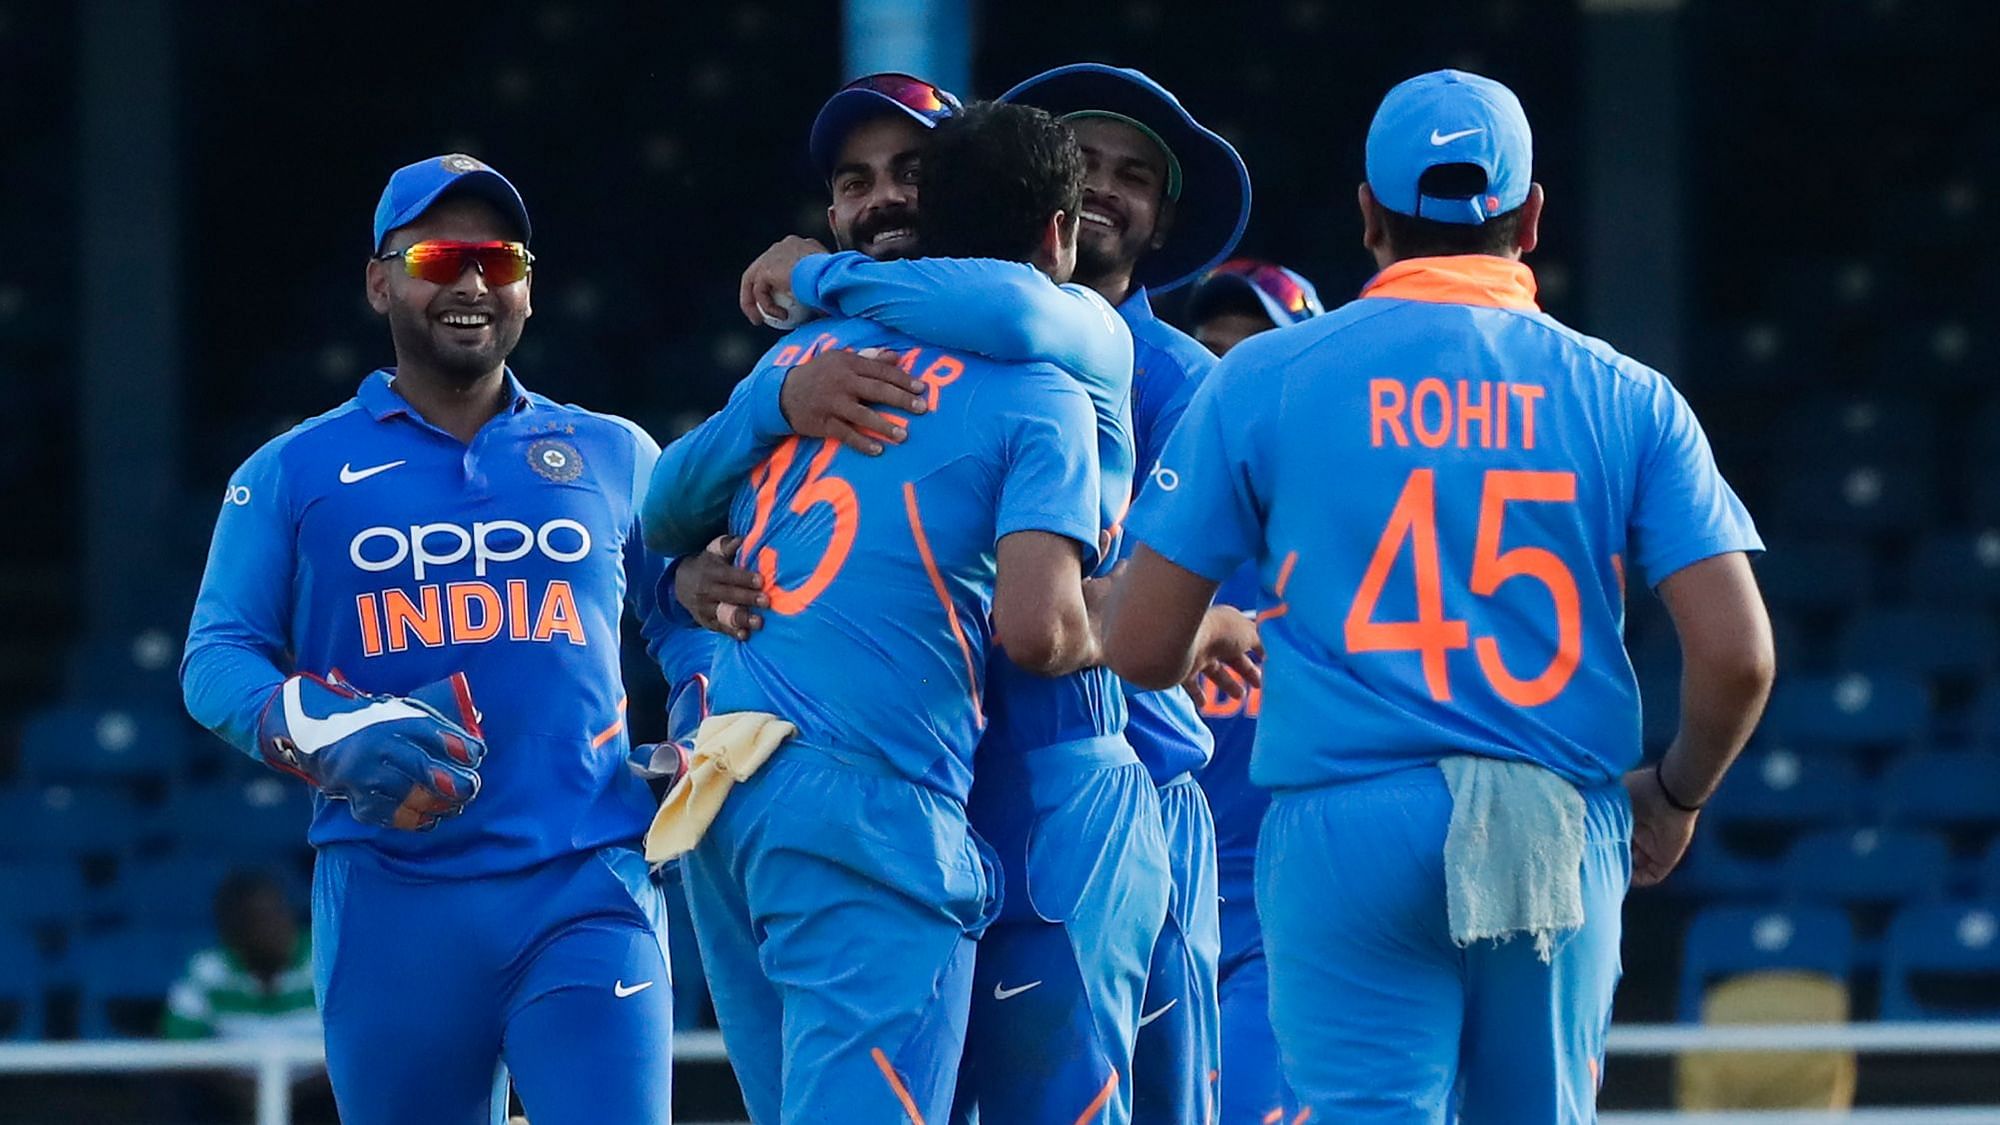 India Vs New Zealand 3rd ODI Live Streaming, Score When, Where to Watch IND vs NZ Live Telecast Online, APP and TV Channels